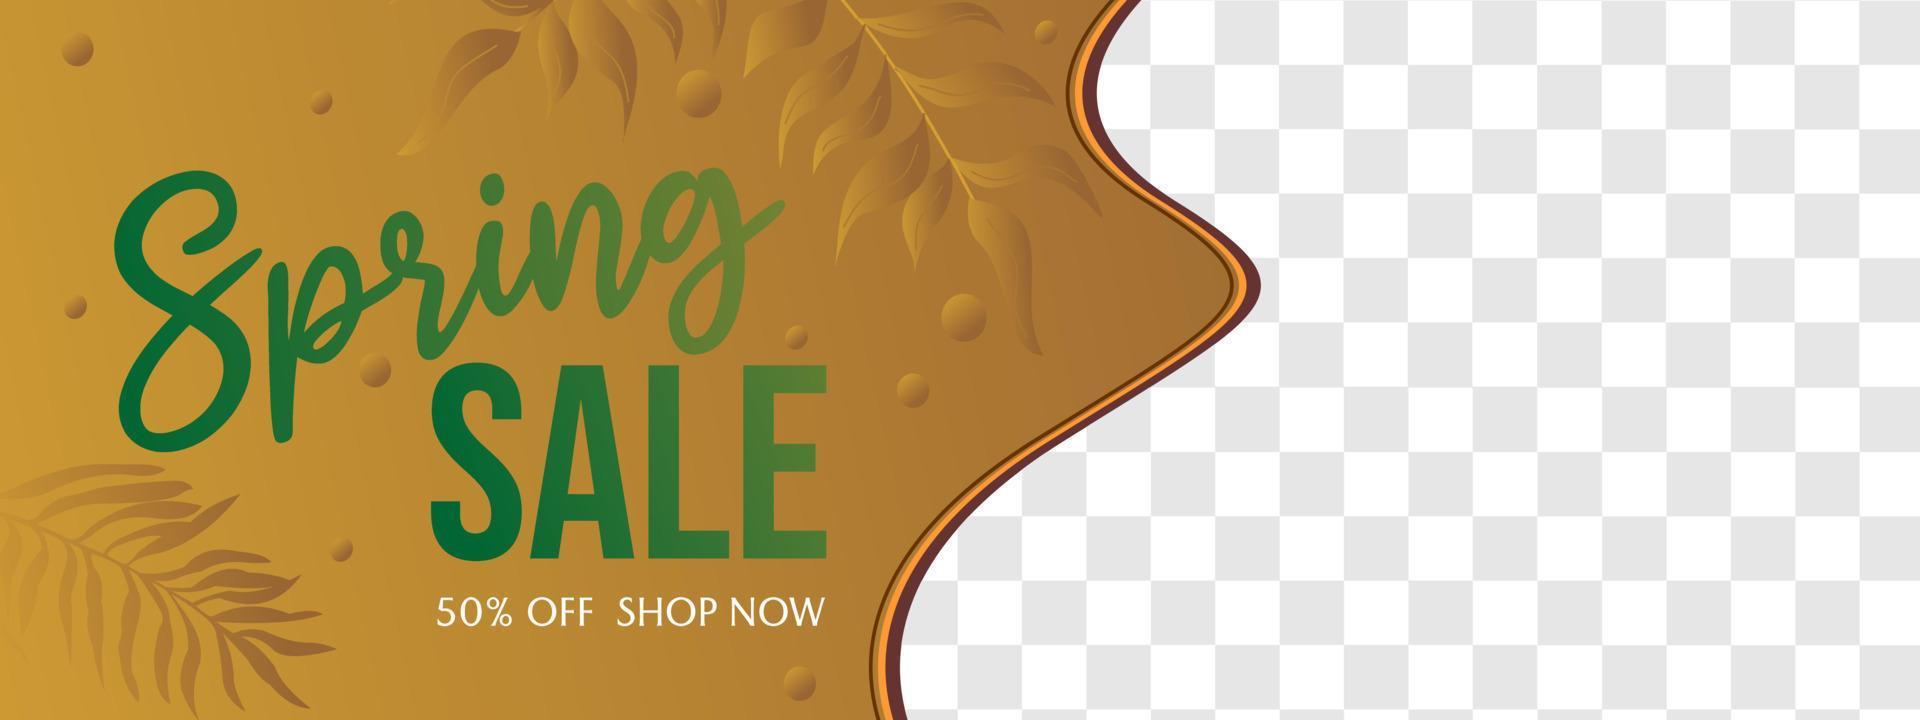 natural themed discount advertising banner design. brown color background with leaf elements vector